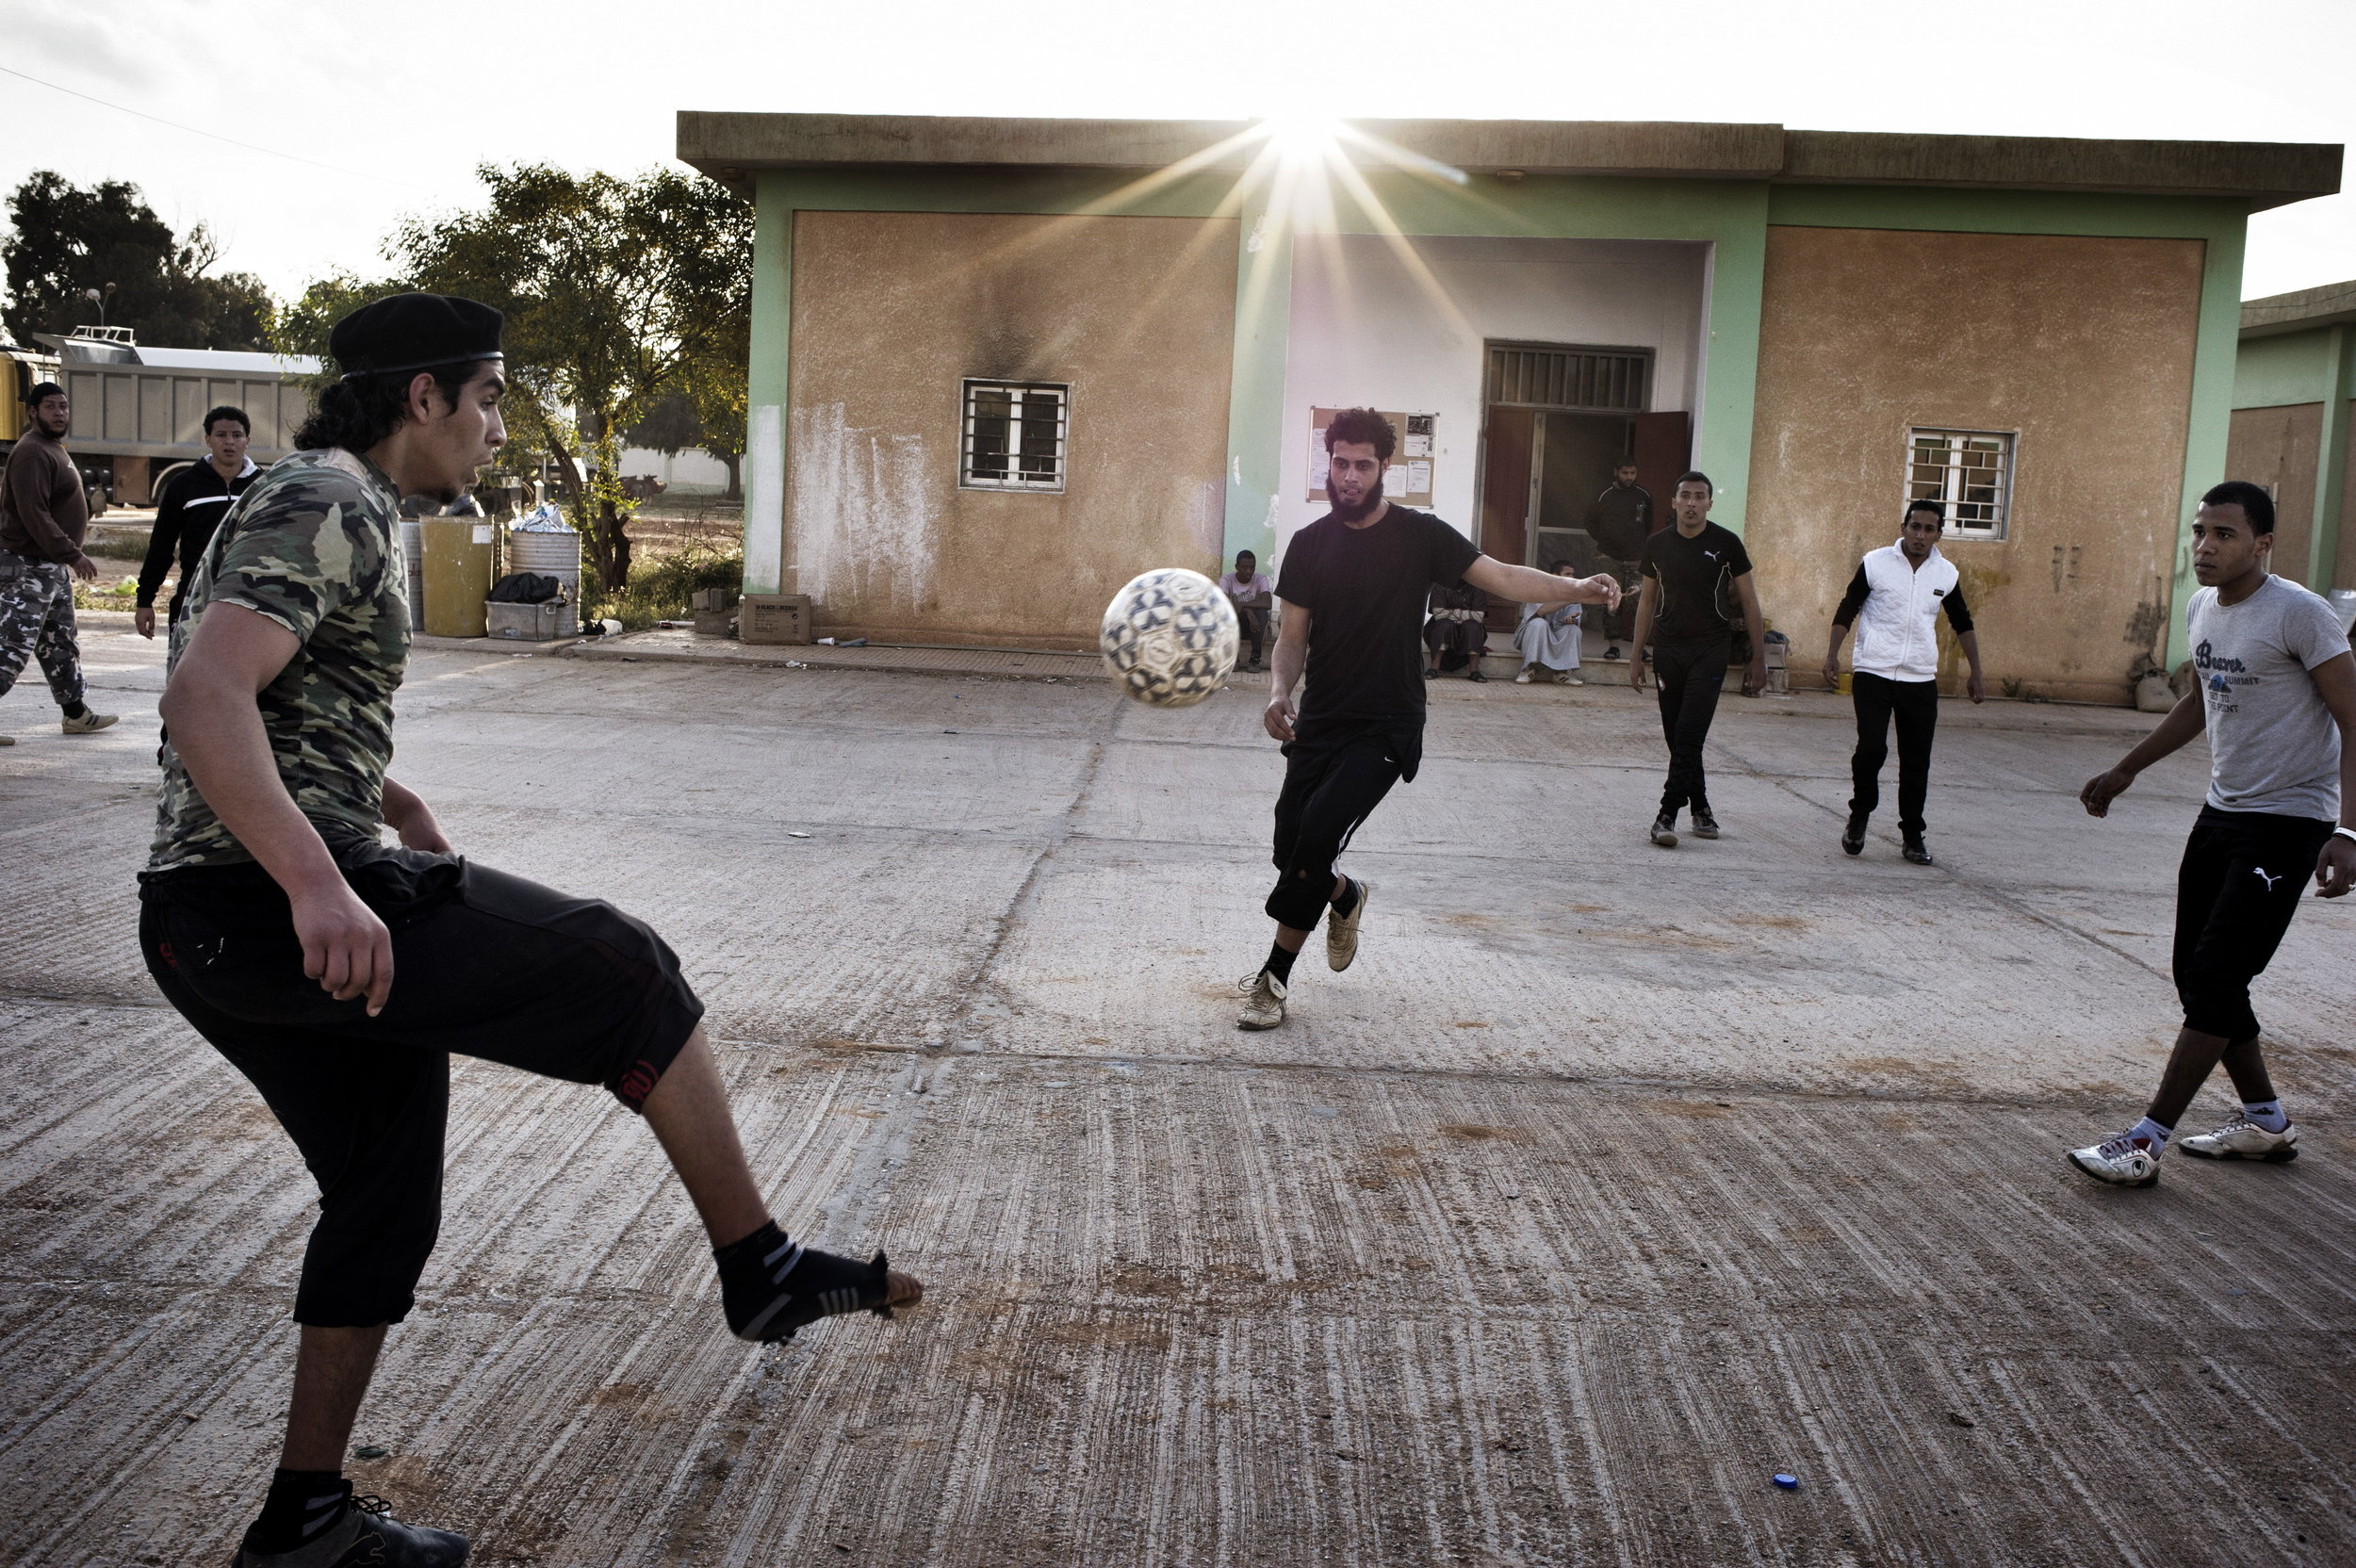  Benghazi Libya  March  28 2012: 
Former rebels participate in training exercises under the transitional government?s Supreme Security Committee (SSC) in Benghazi. Officials say the program aims to bring thousands of former rebels under the wing of t